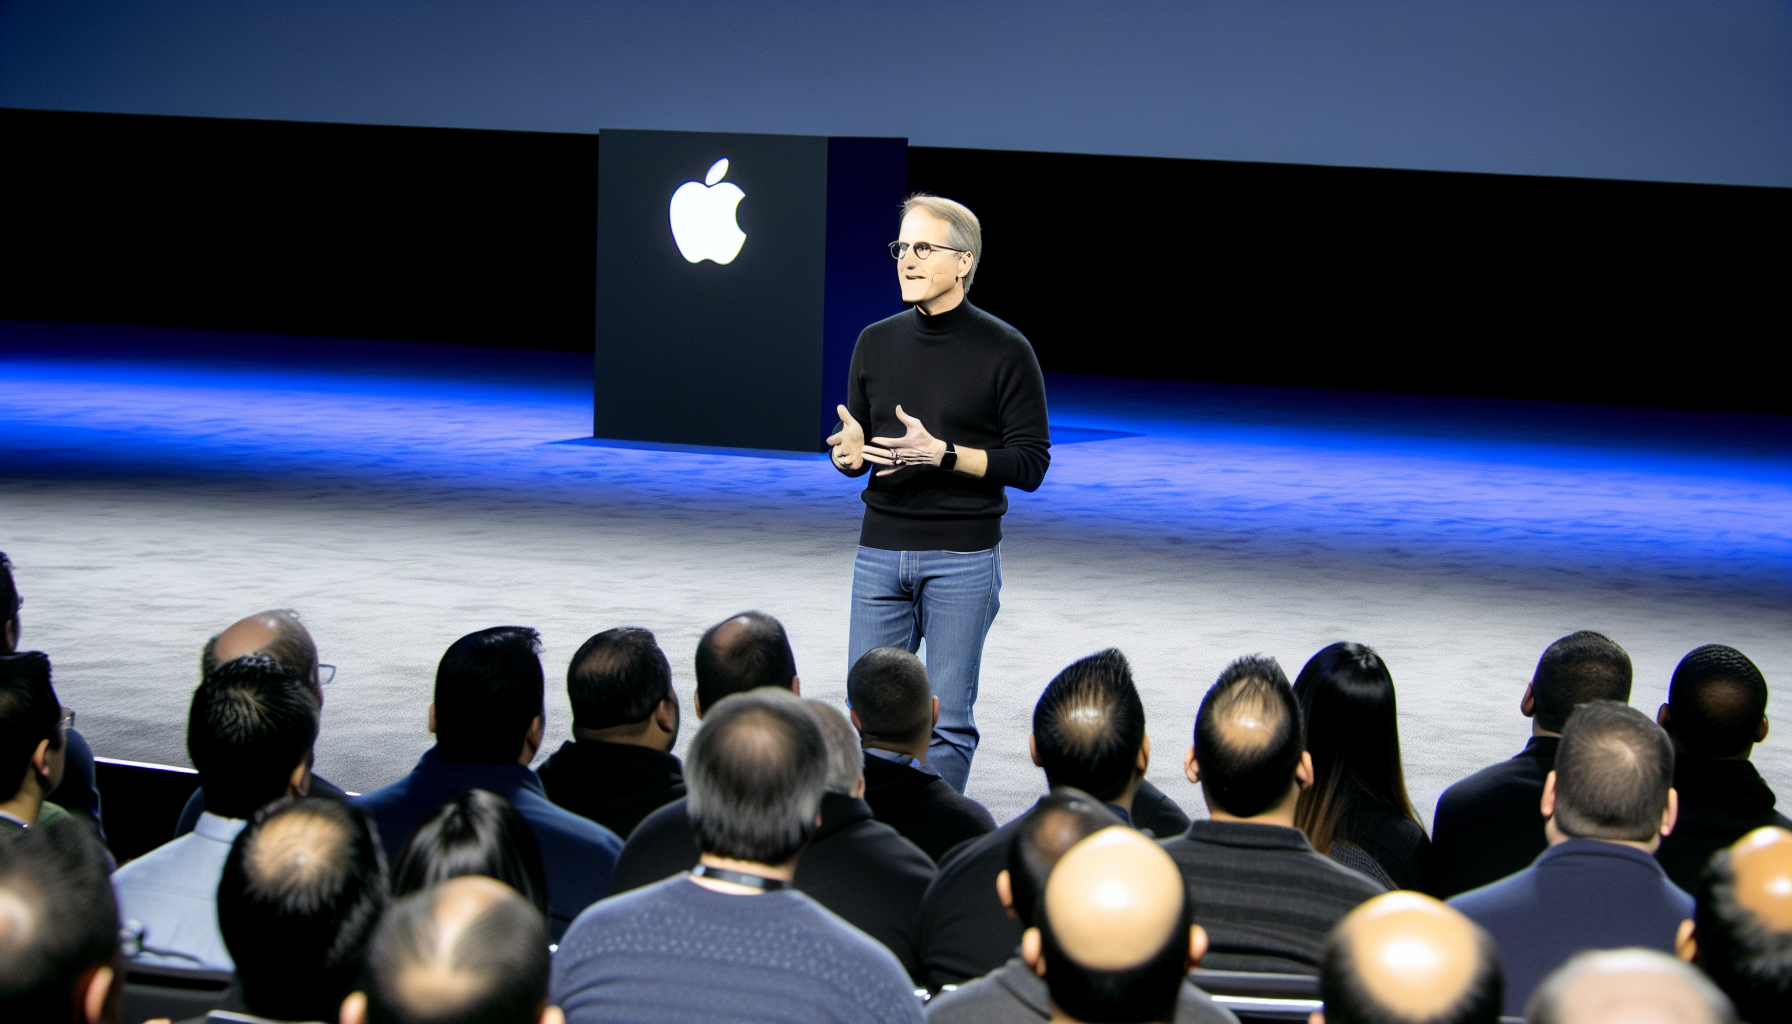 Steve Jobs presenting at an Apple product launch event